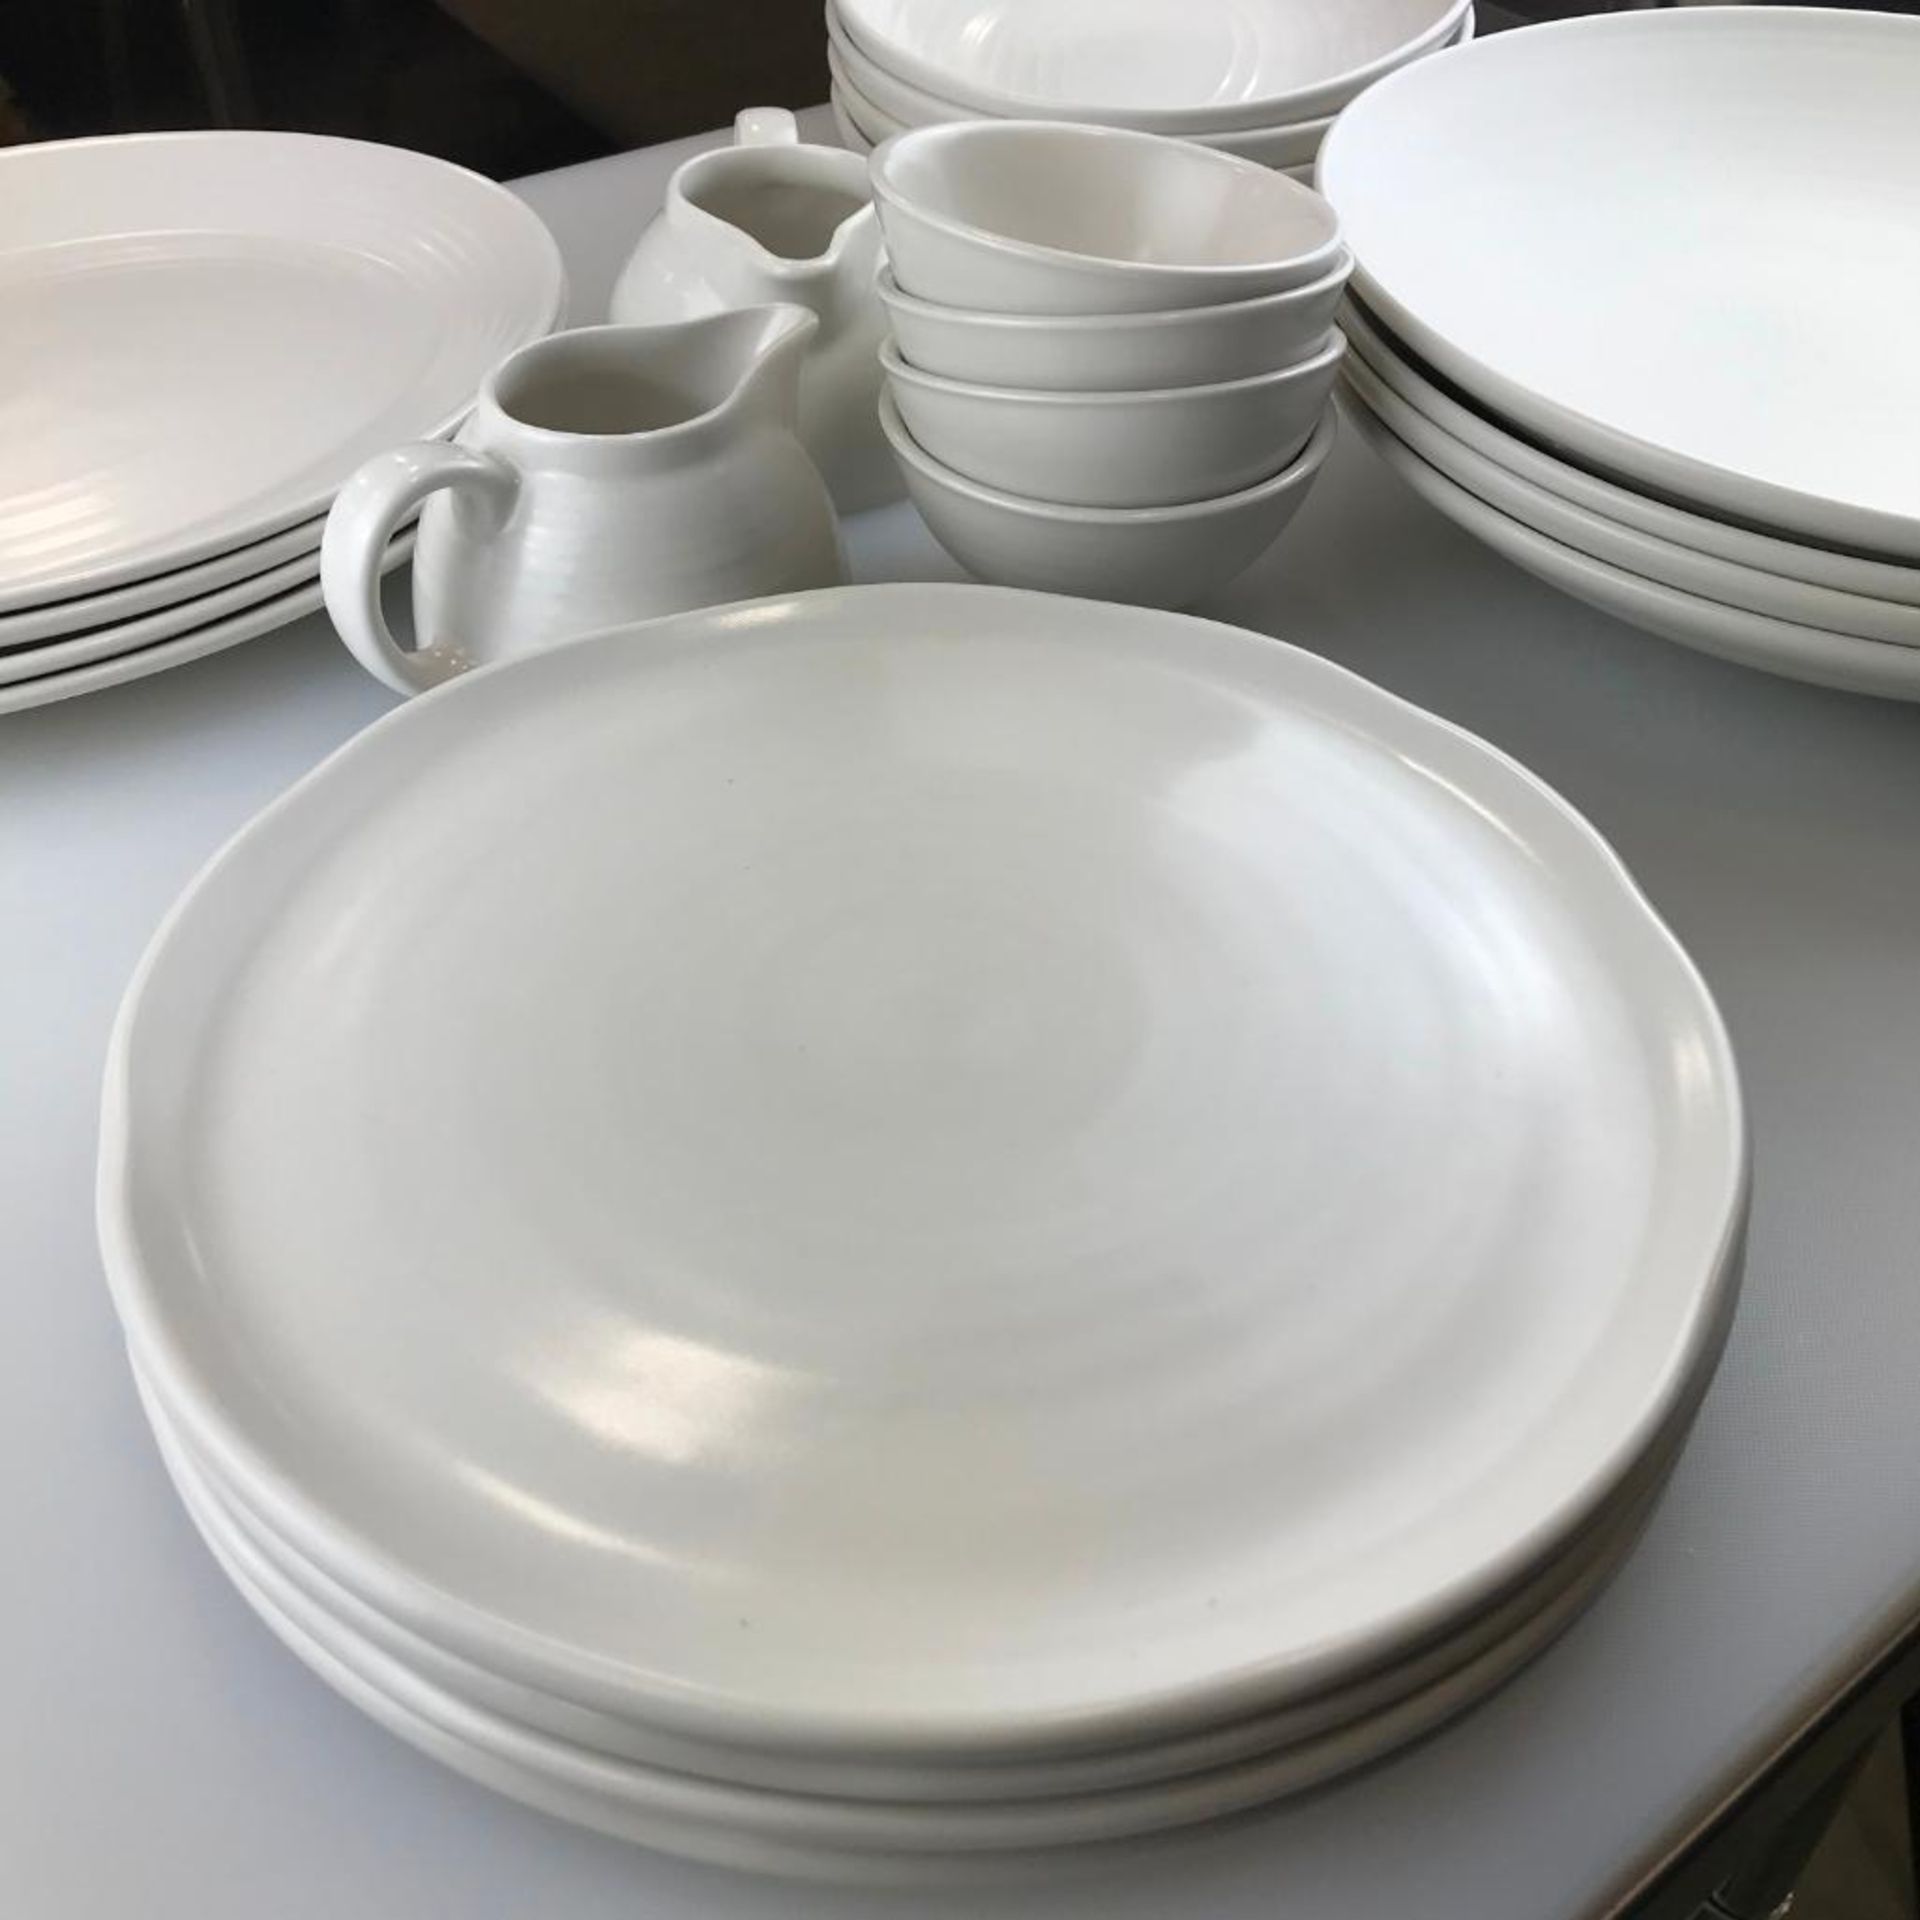 22 PIECE DUDSON EVO PEARL DINNERWARE SET, MADE IN ENGLAND - Image 5 of 8